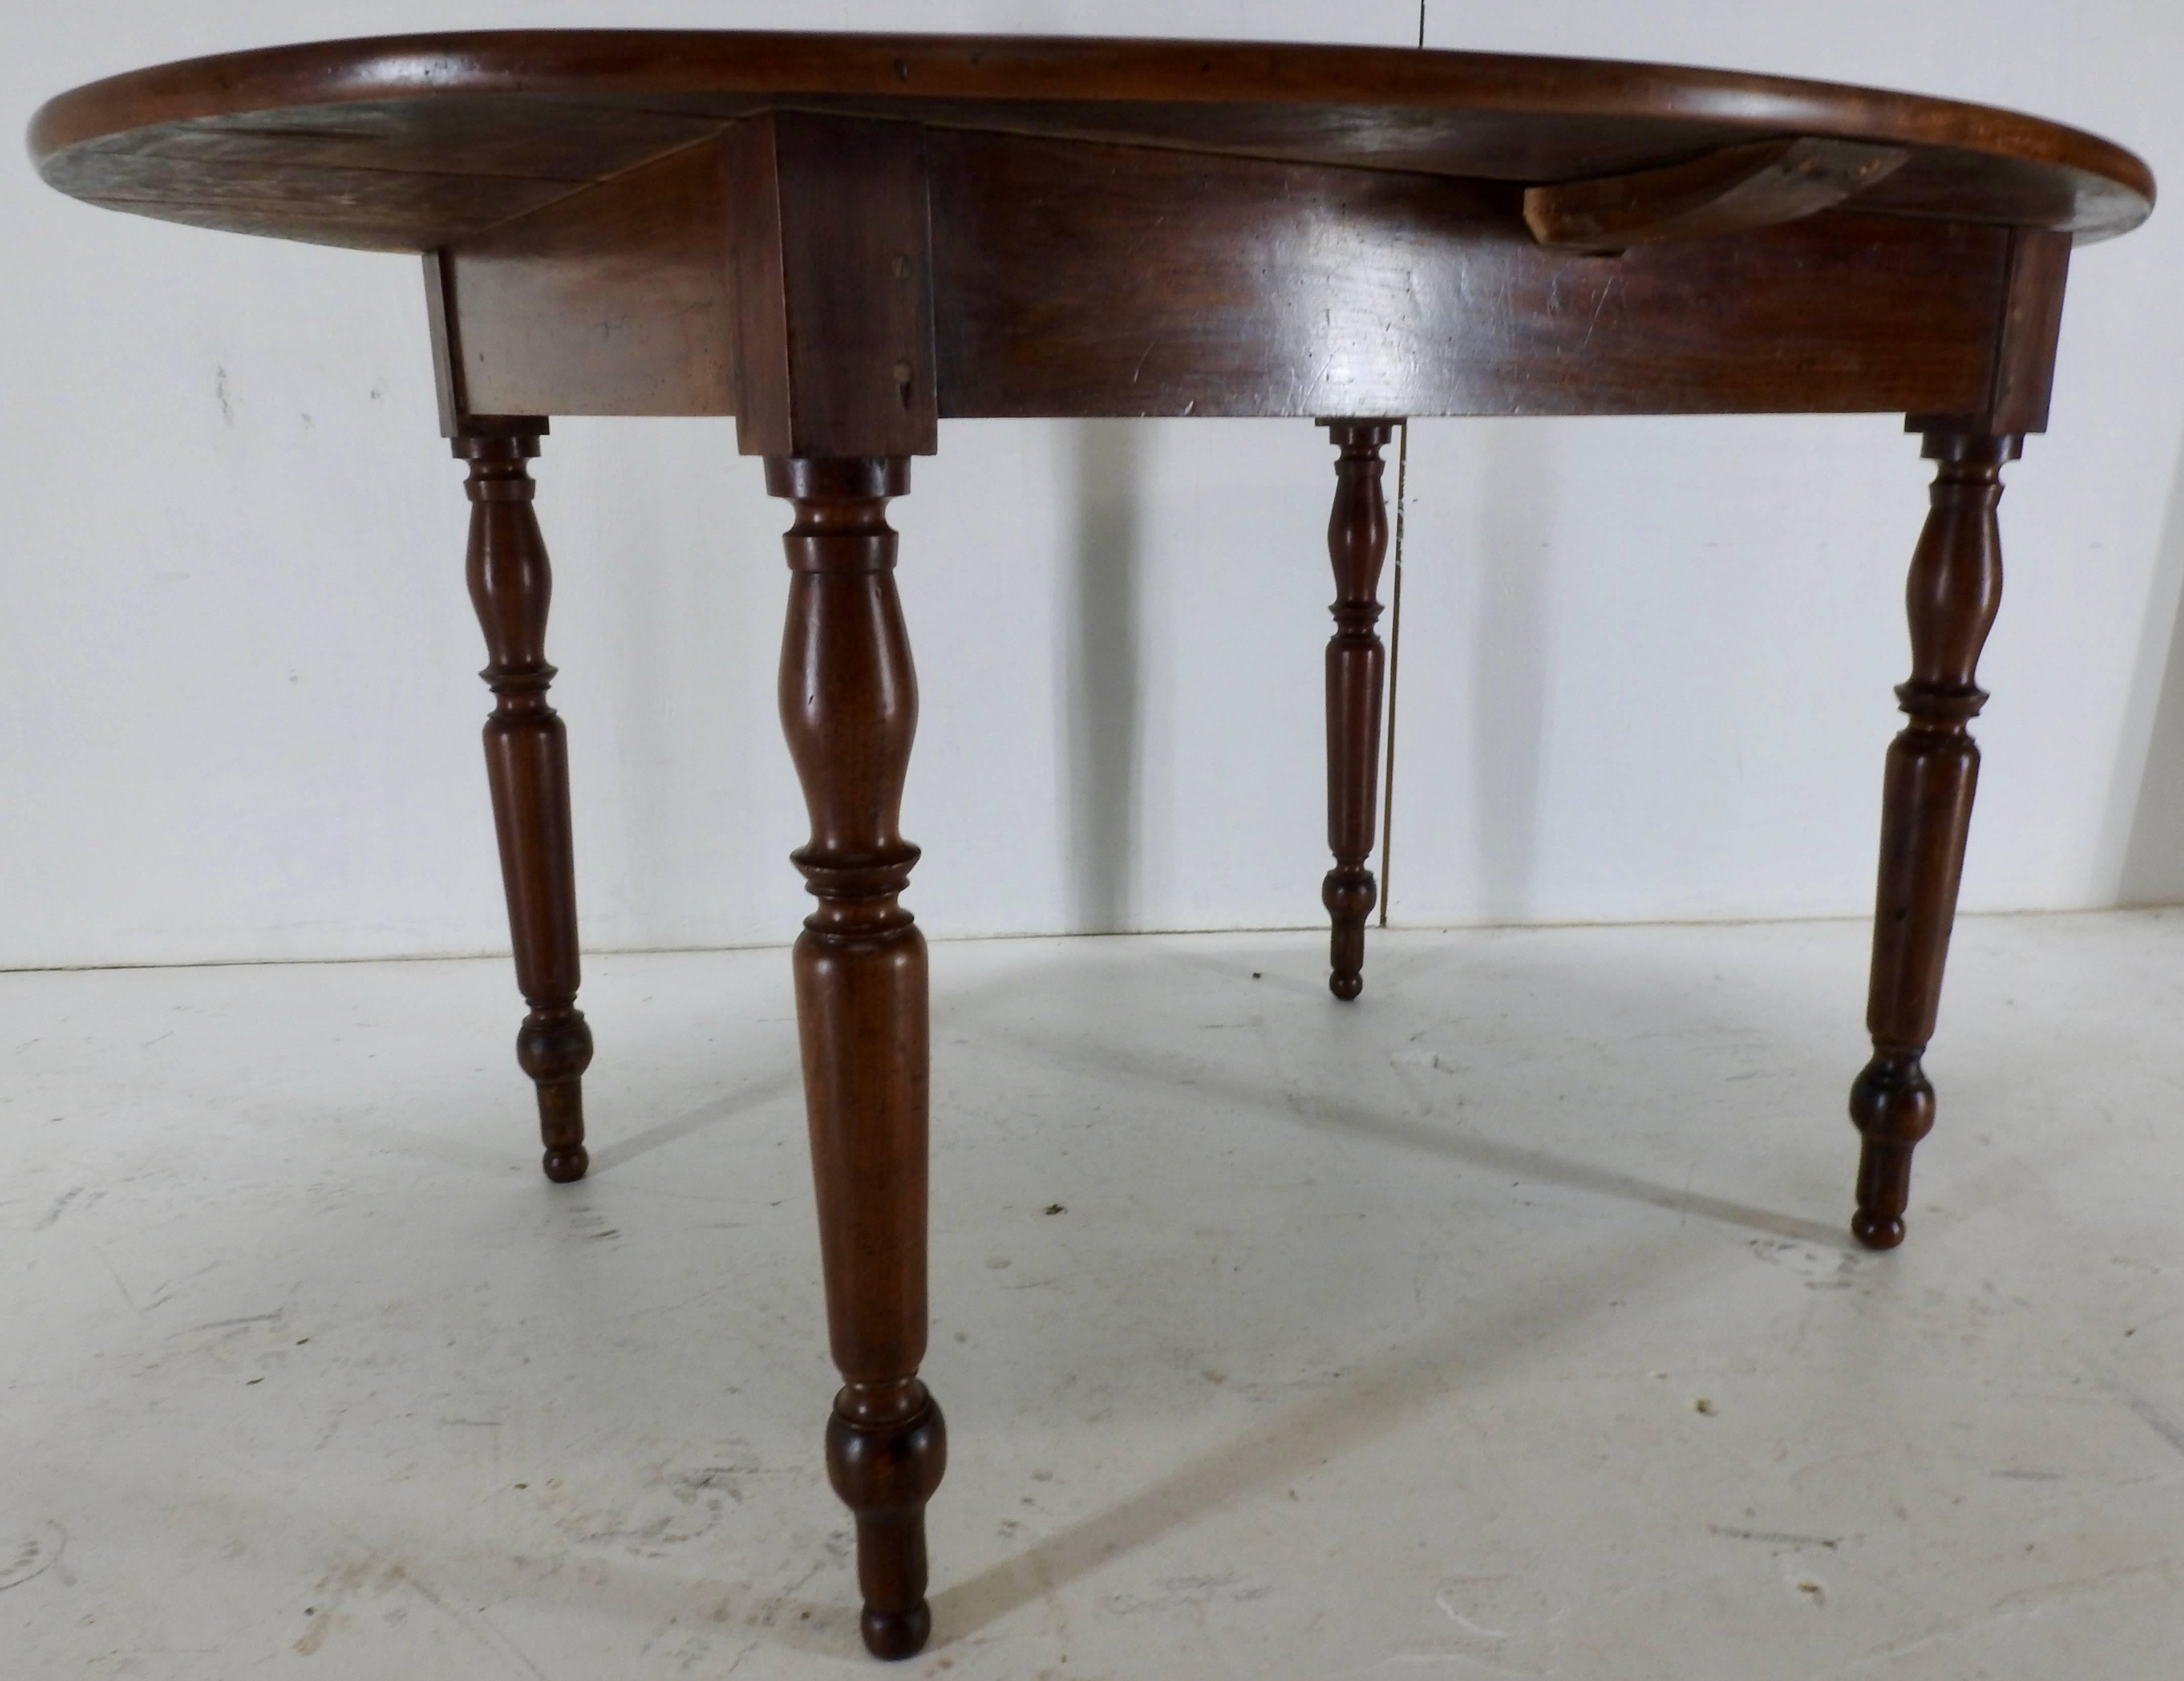 Offering this mid-19th century cherrywood dinette table in an oval shape. Has nicely turned legs and a metal crossbar underneath for support. The warm grain to this table makes for beautiful lines. The craftsmanship is absolutely stunning with many